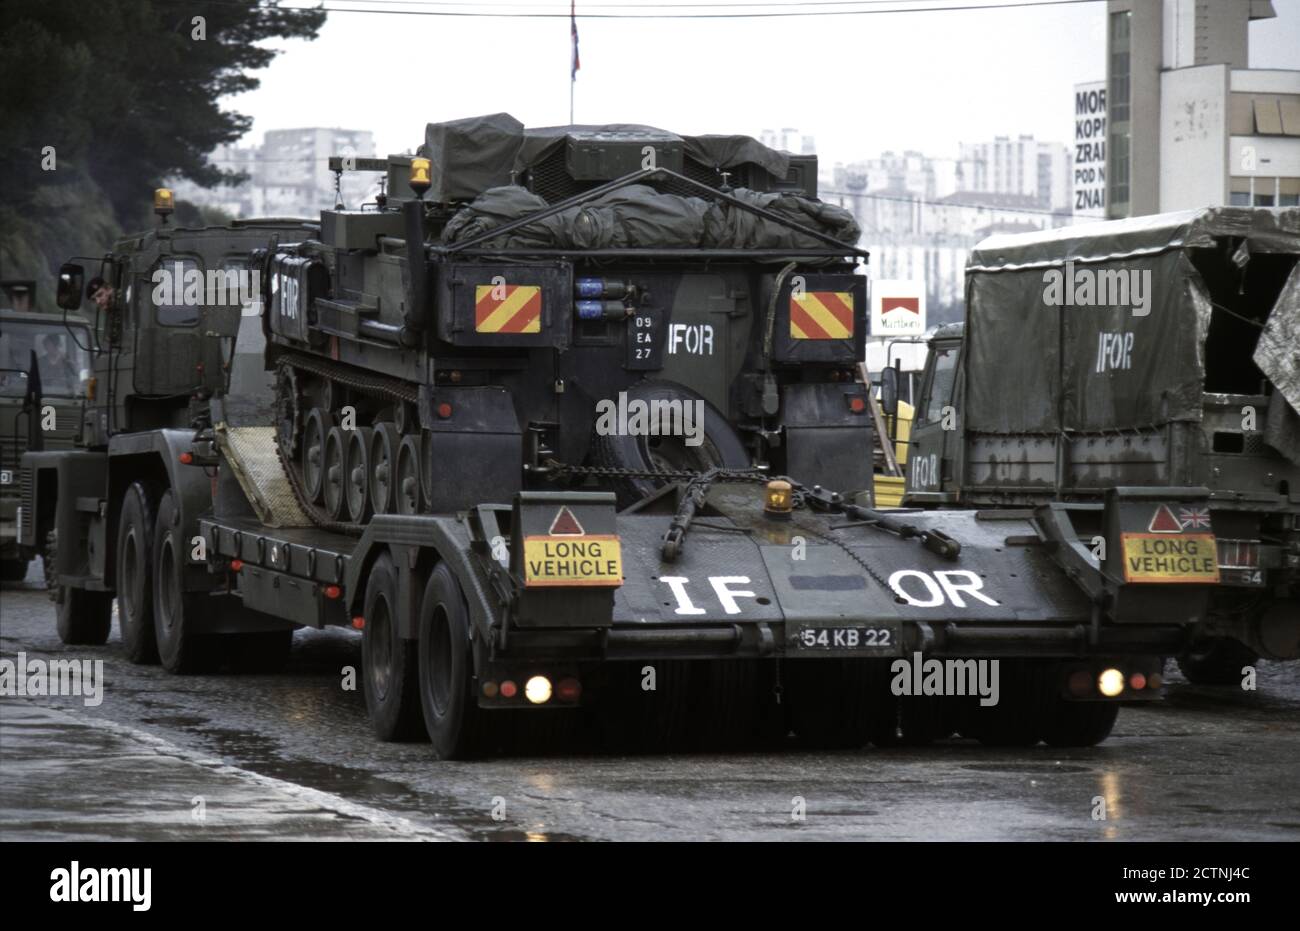 27th December 1995 During the war in Bosnia: British Army armour, part of the newly formed IFOR contingent, arrives in the port of Split, Croatia. Stock Photo